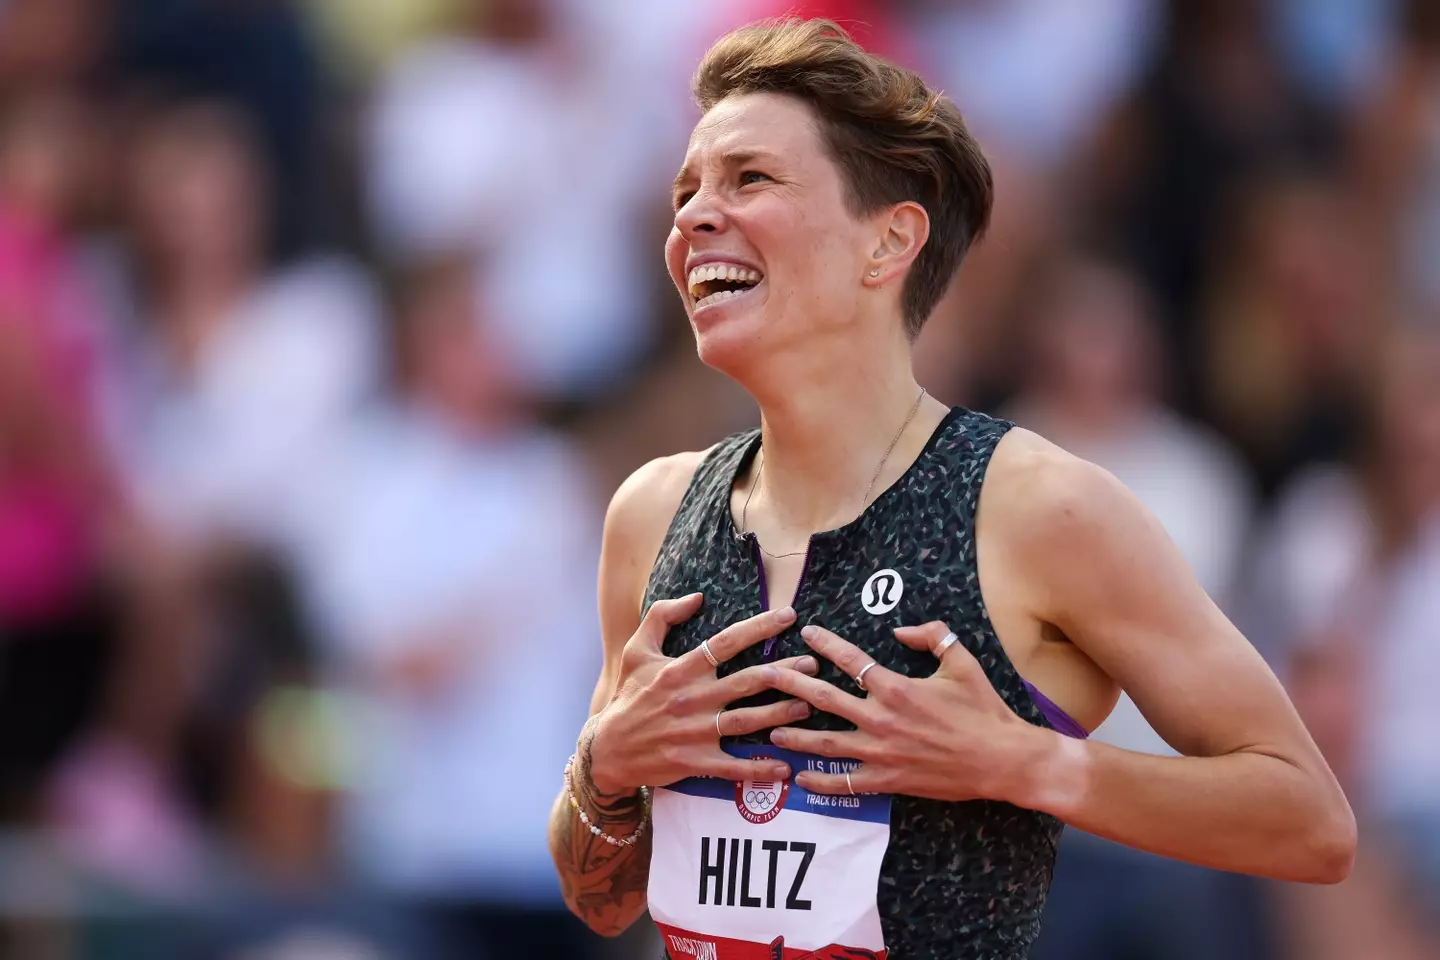 Nikki Hiltz is heading to the Paris Olympics. (Christian Petersen/Getty Images)